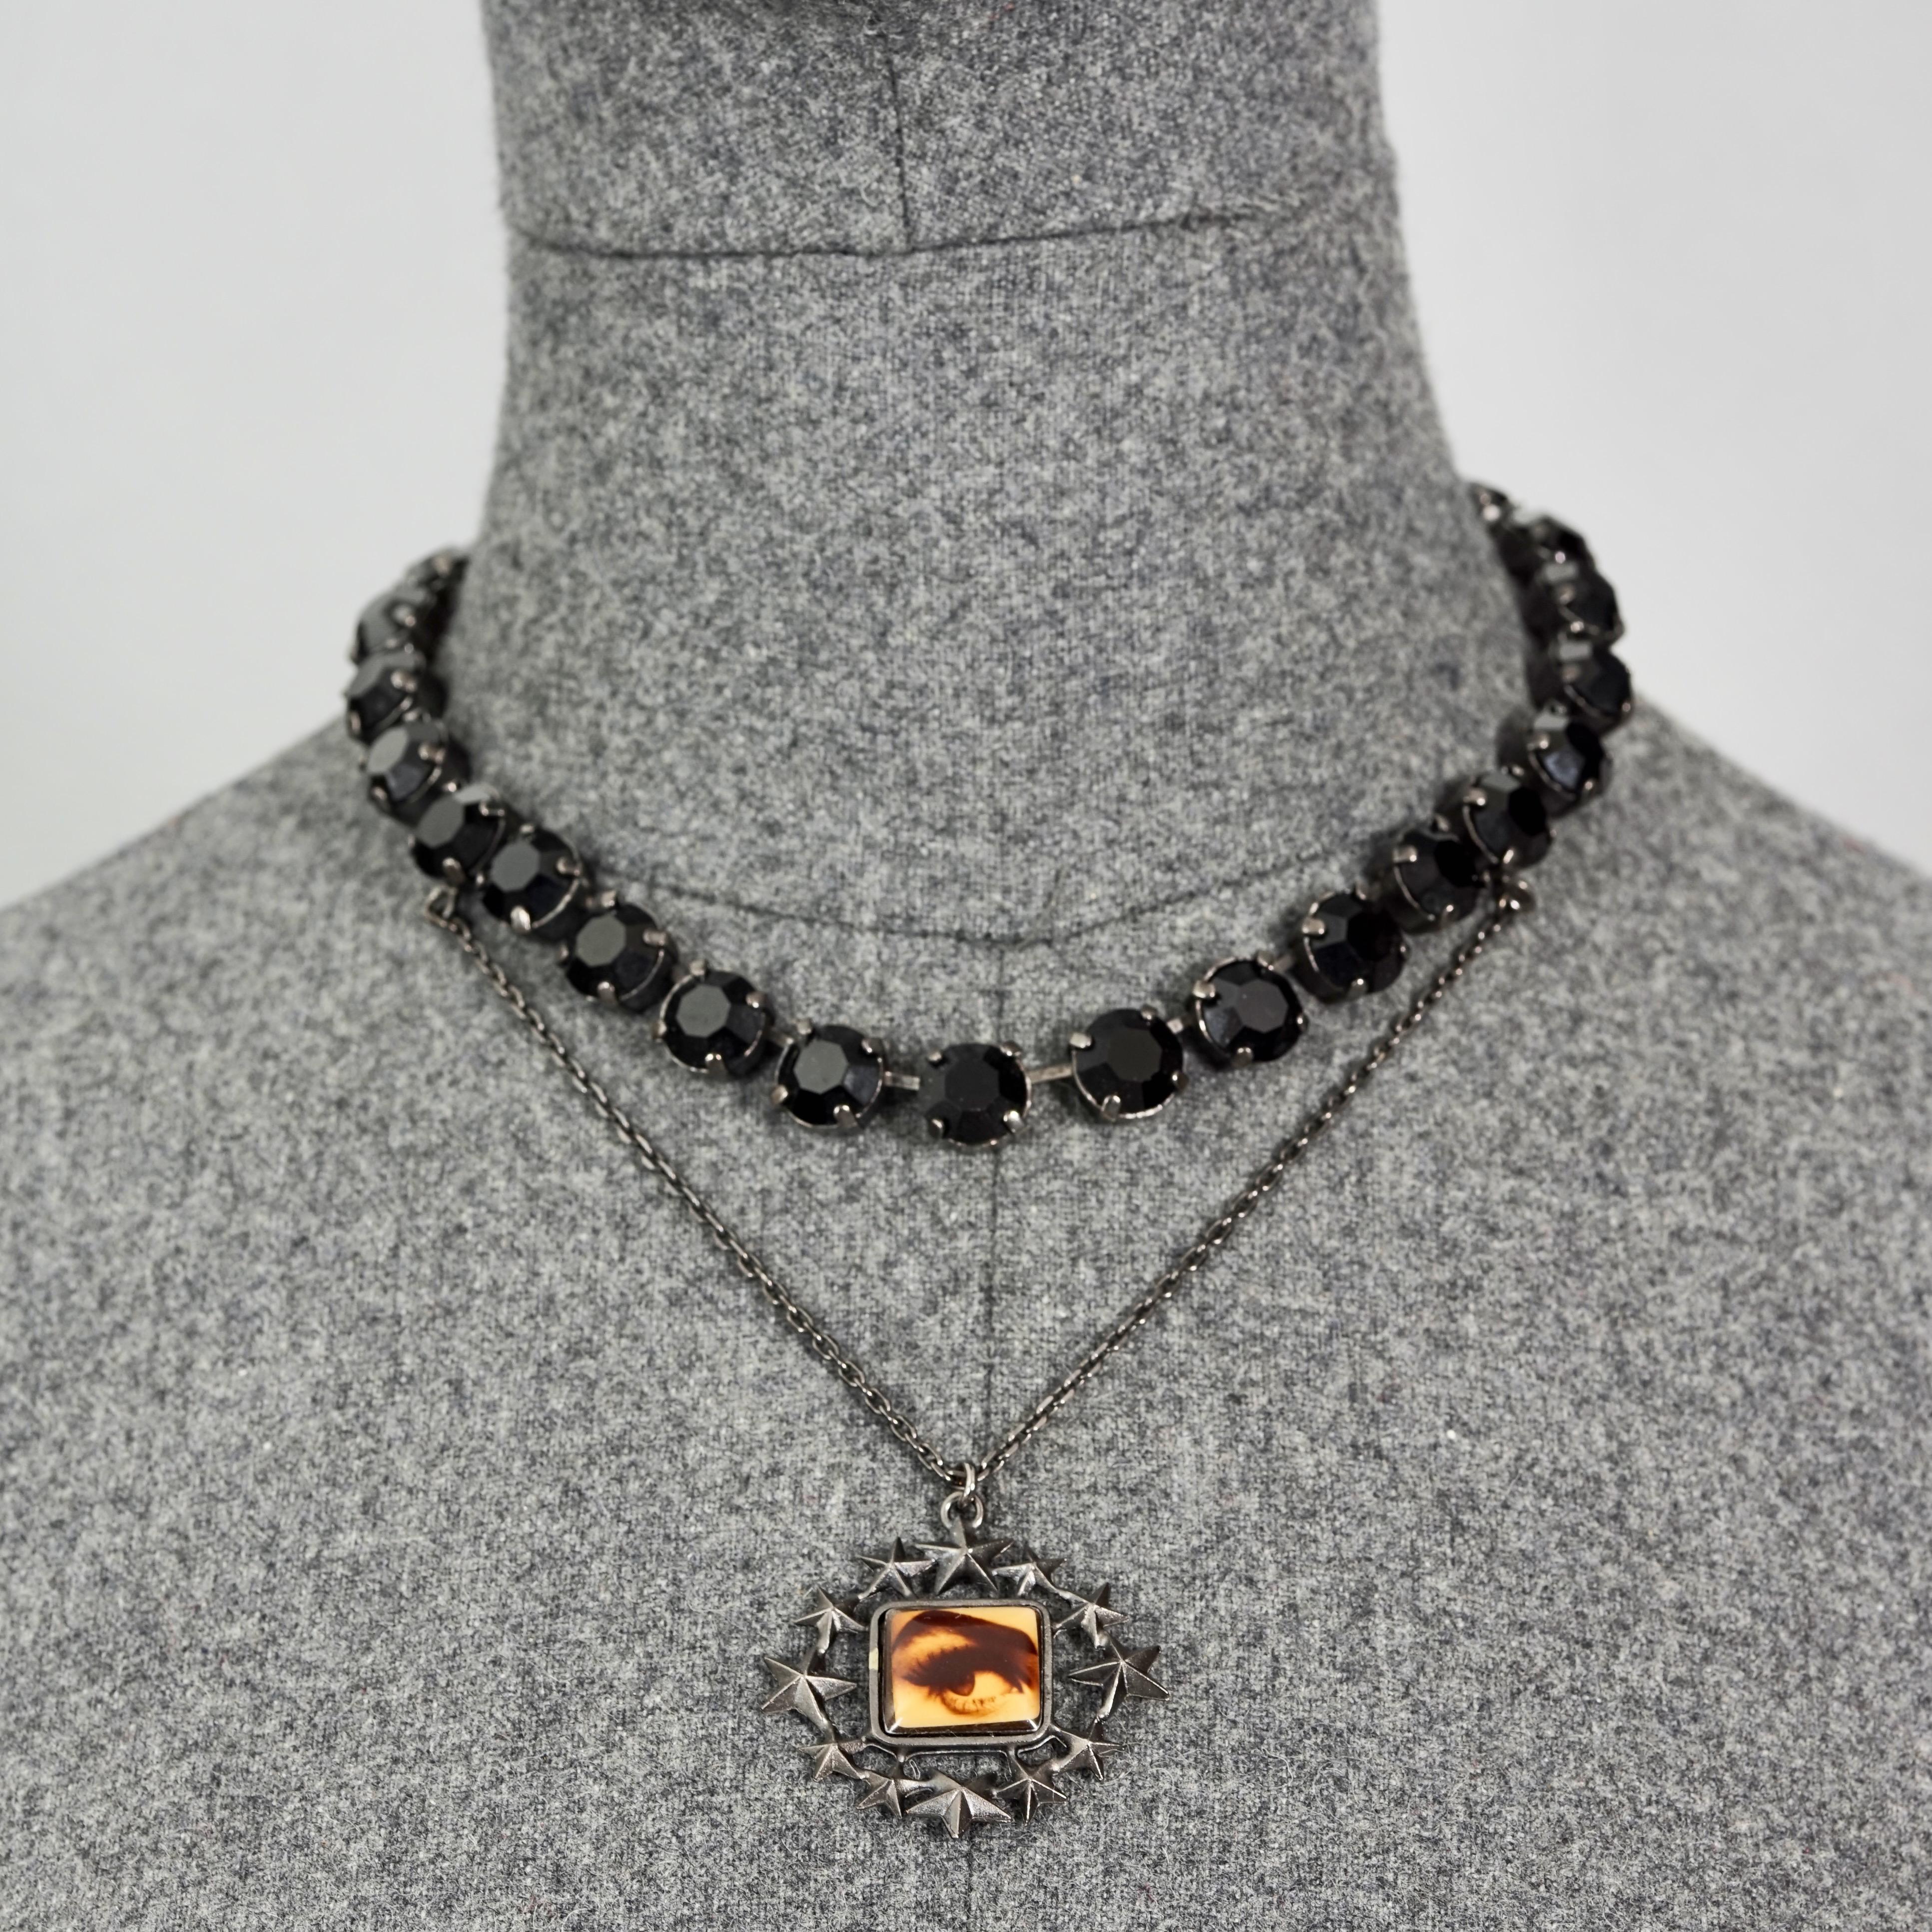 Vintage JEAN PAUL GAULTIER Eye Stars Novelty Black Rhinestones Gothic Necklace

Measurements:
Height Centrepiece: 4.13 inches (10.5 cm)
Wearable Length: 15.35 inches (39 cm)

Features:
- 100% Authentic JEAN PAUL GAULTIER.
- Black rhinestones